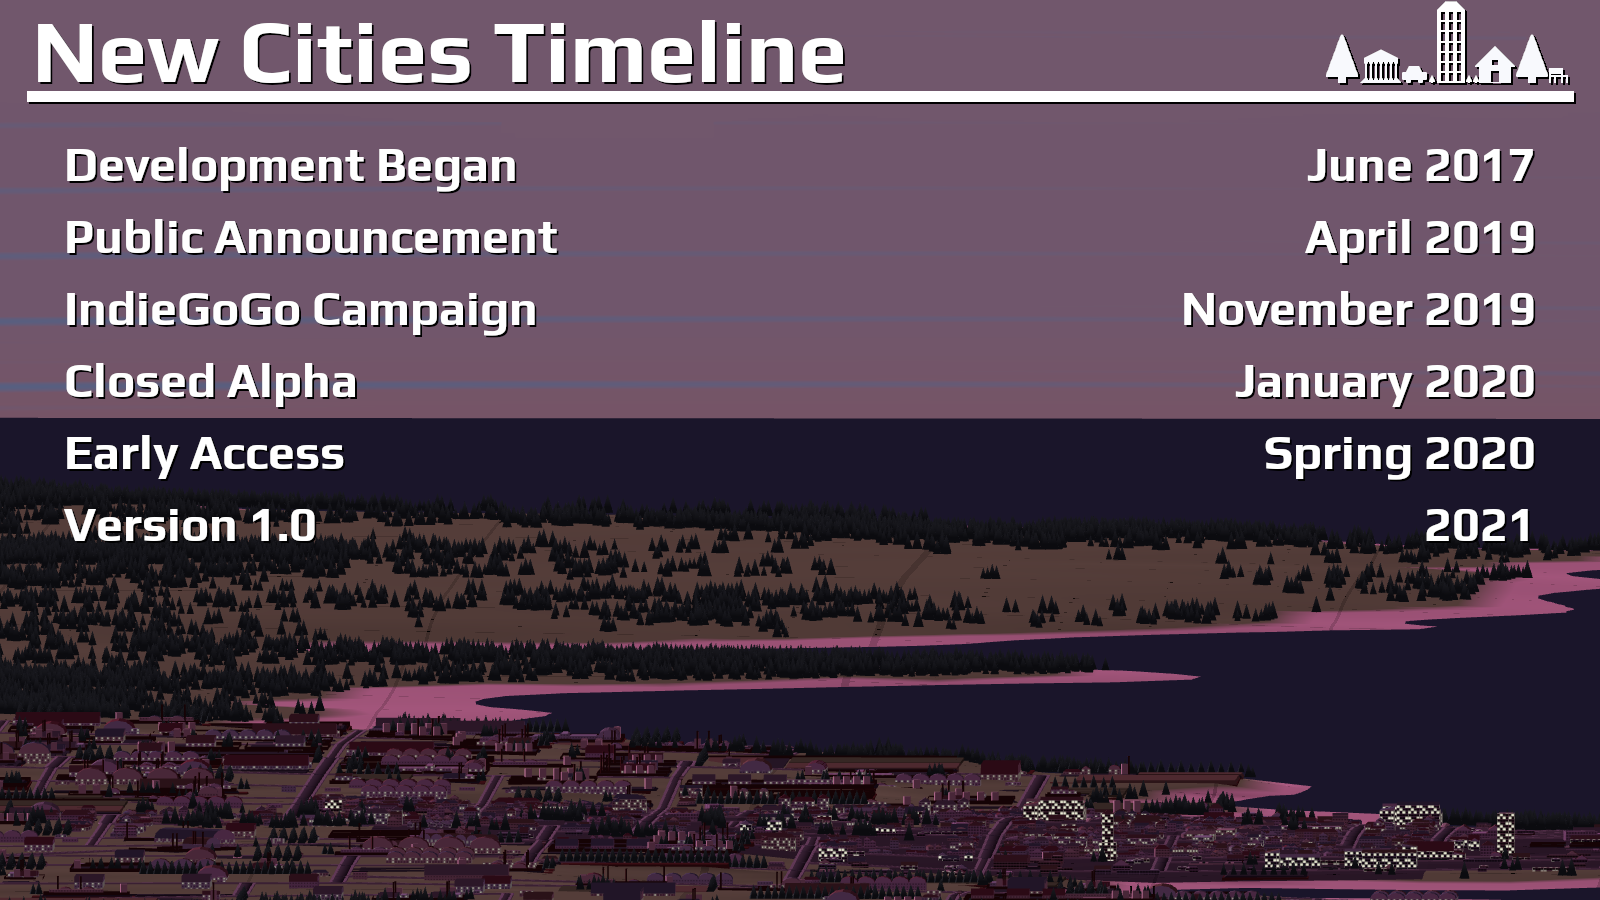 Timeline for New Cities